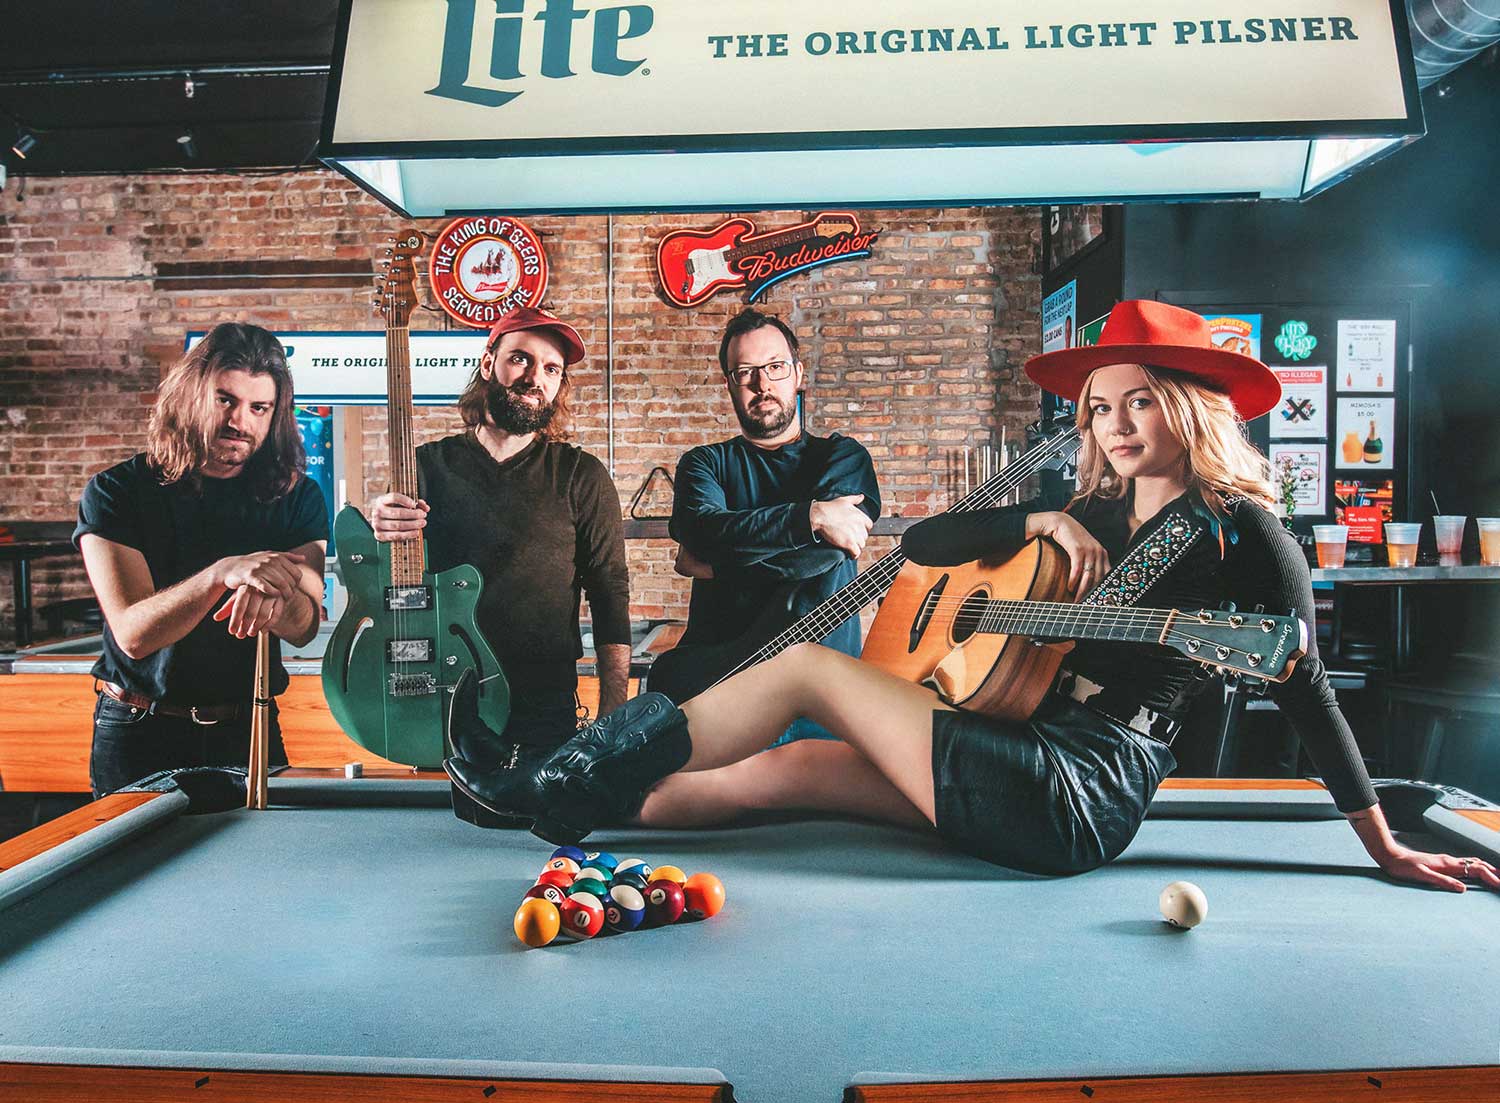 Mackenzie O'Brien sitting on a pool table with her band posing in the background.